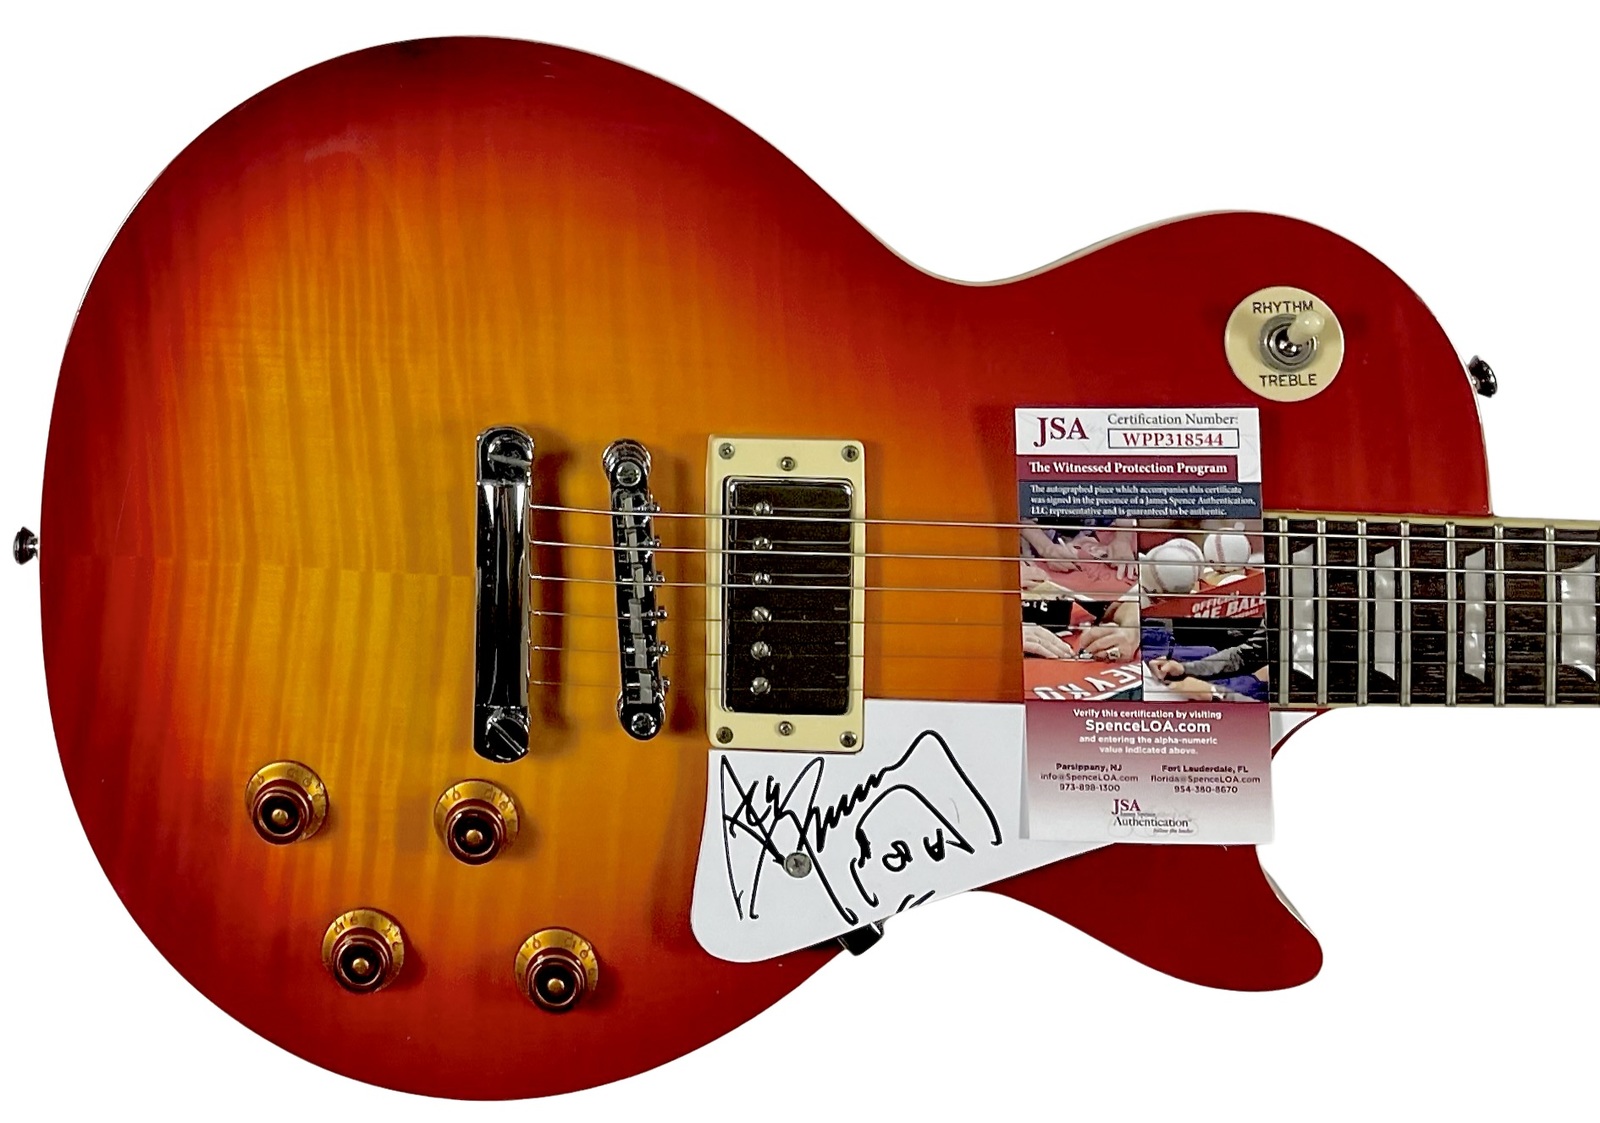 ACE FREHLEY SIGNED Autographed EPIPHONE Electric GUITAR JSA CERTIFIED AUTHENTIC - $2,499.99